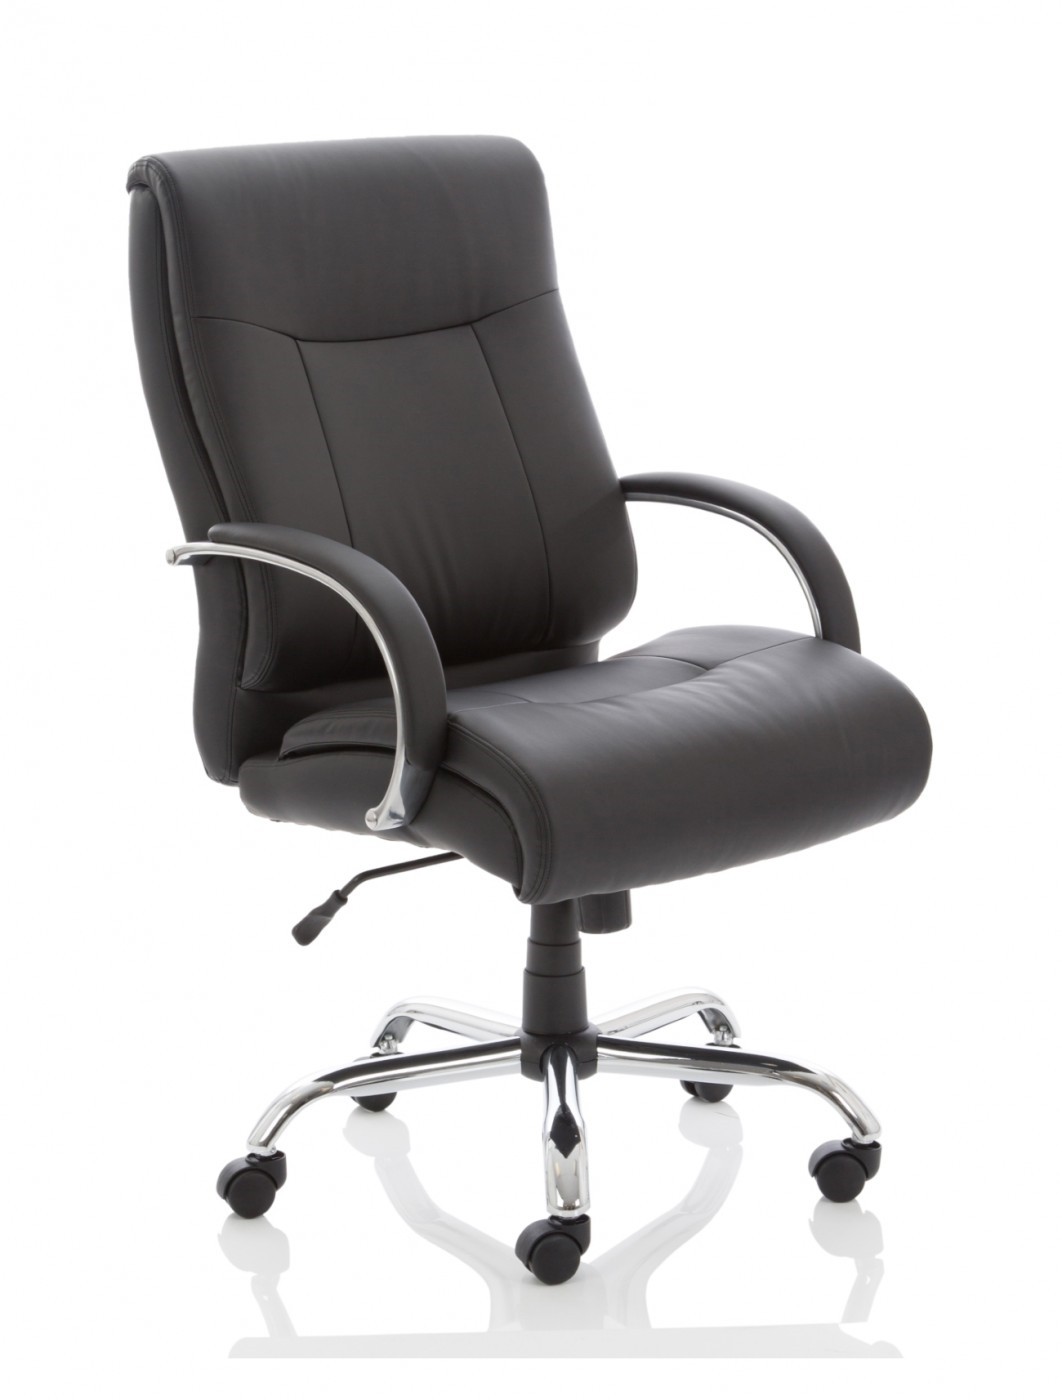 Office Chairs - Drayton HD Super Heavy Duty Executive Leather Office Chair  EX000191 - enlarged view